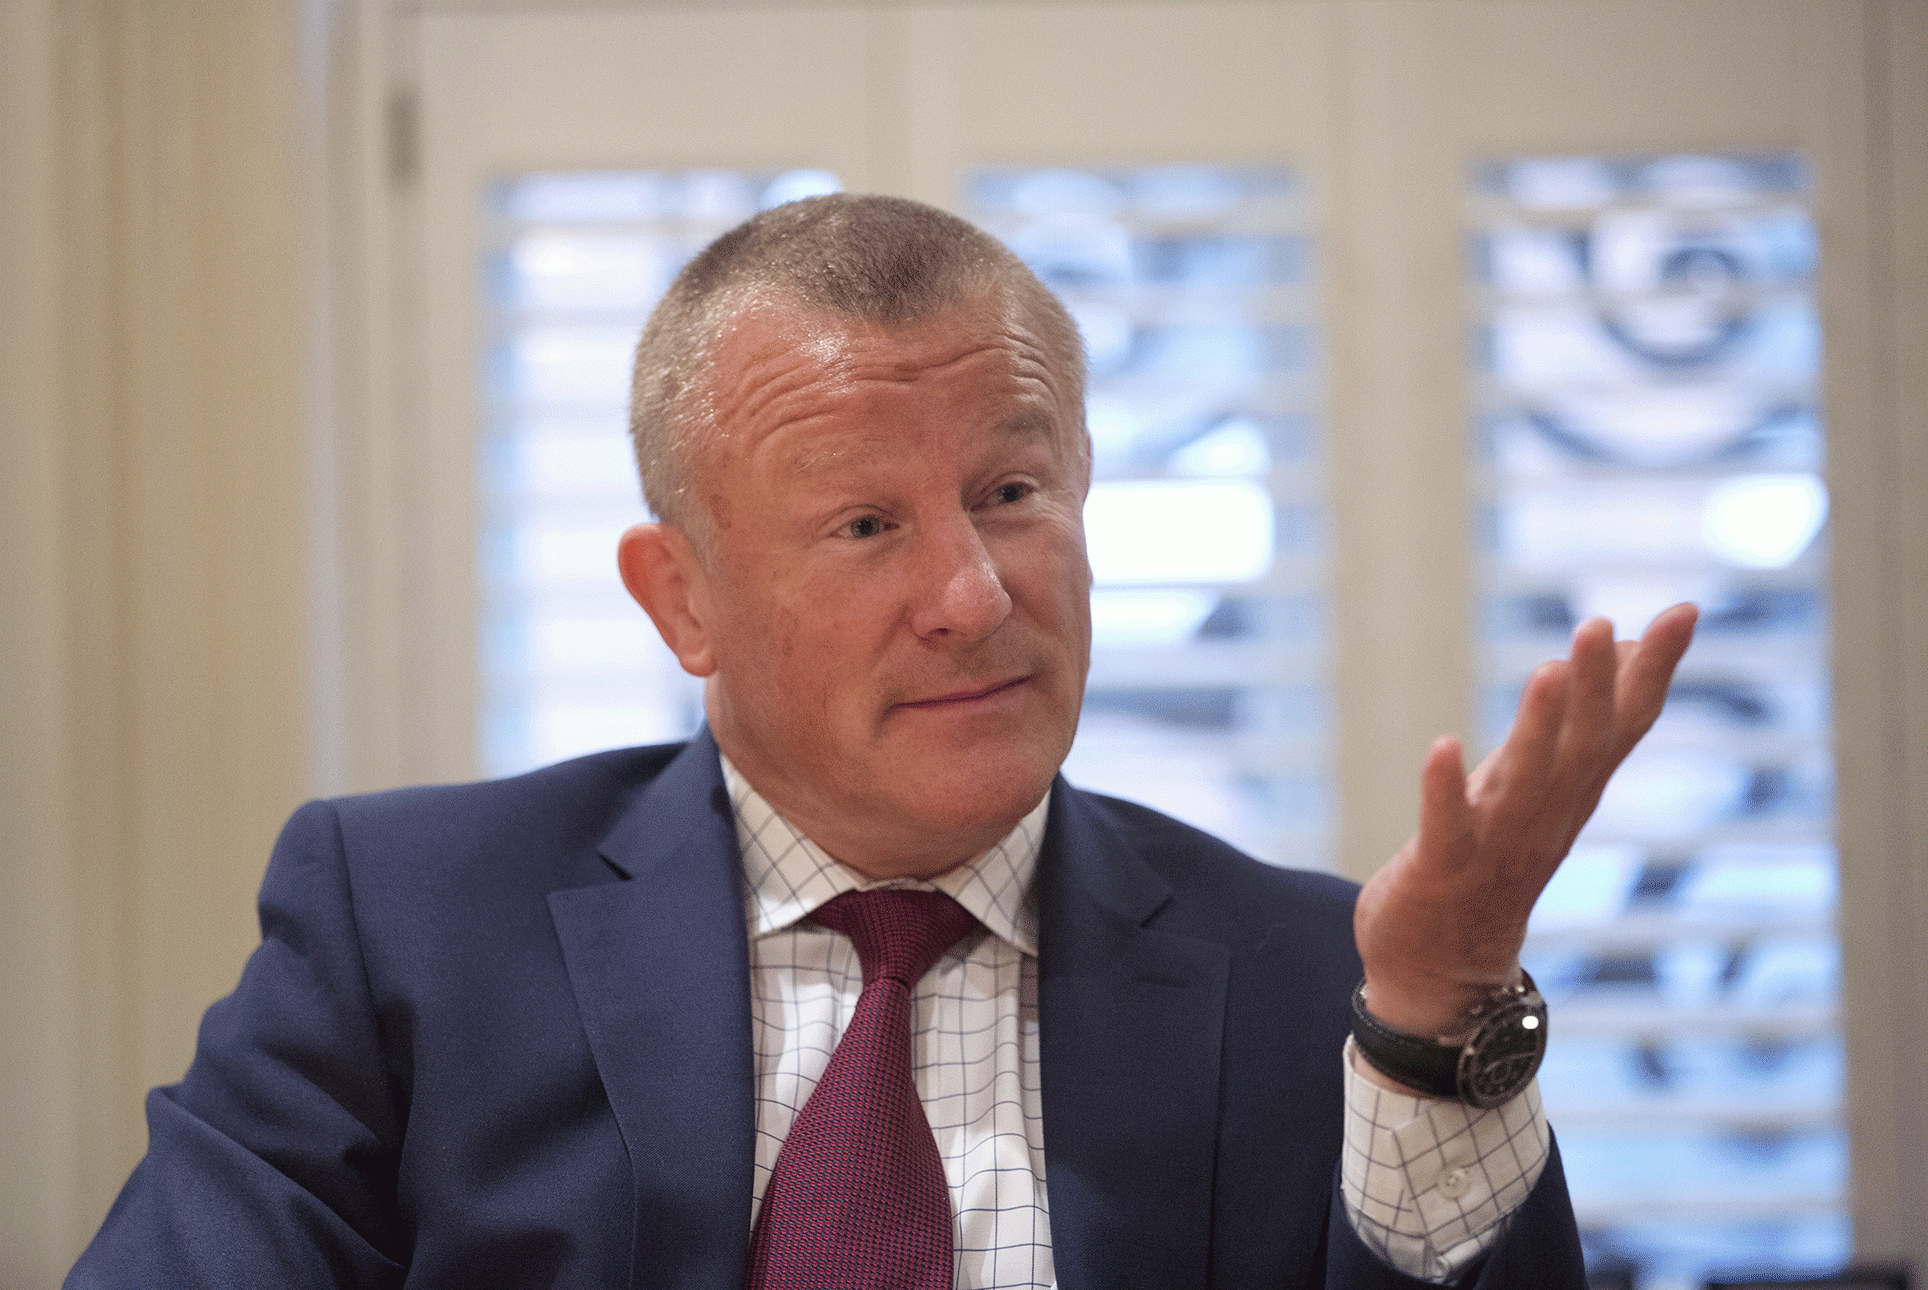 Neil Woodford managed £30bn in funds while at Invesco